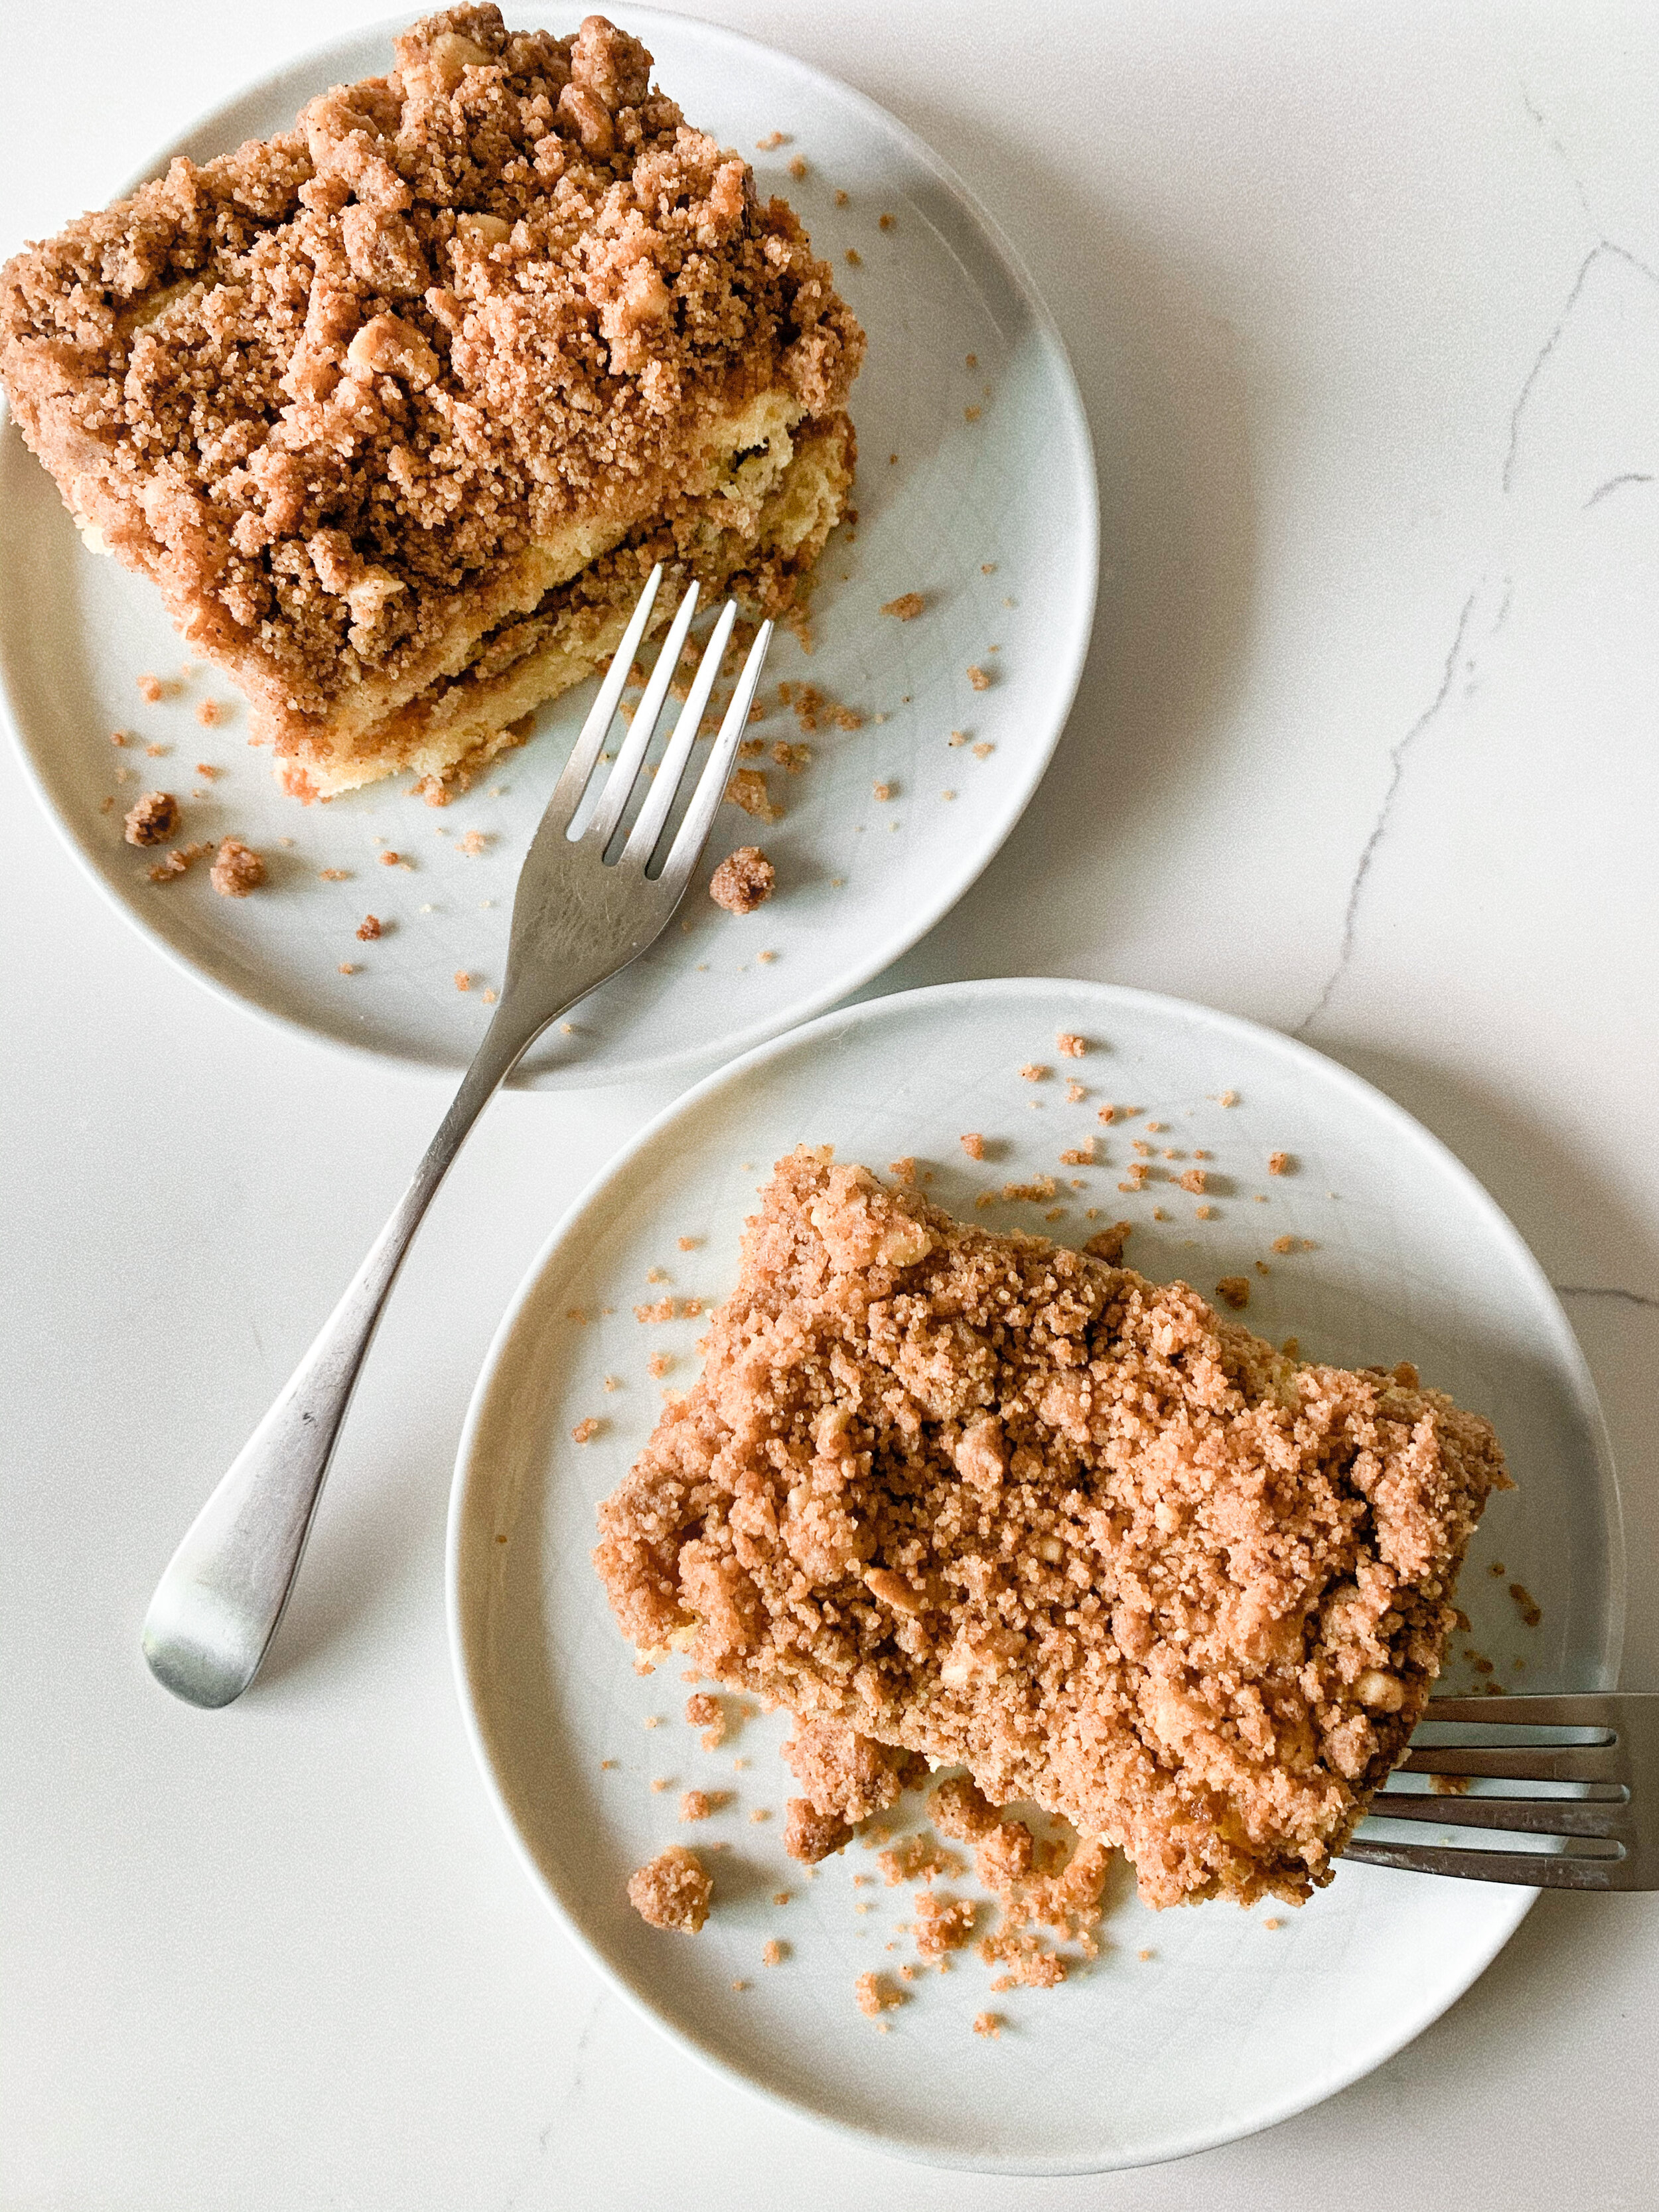 The baked and plated sour cream coffee cake